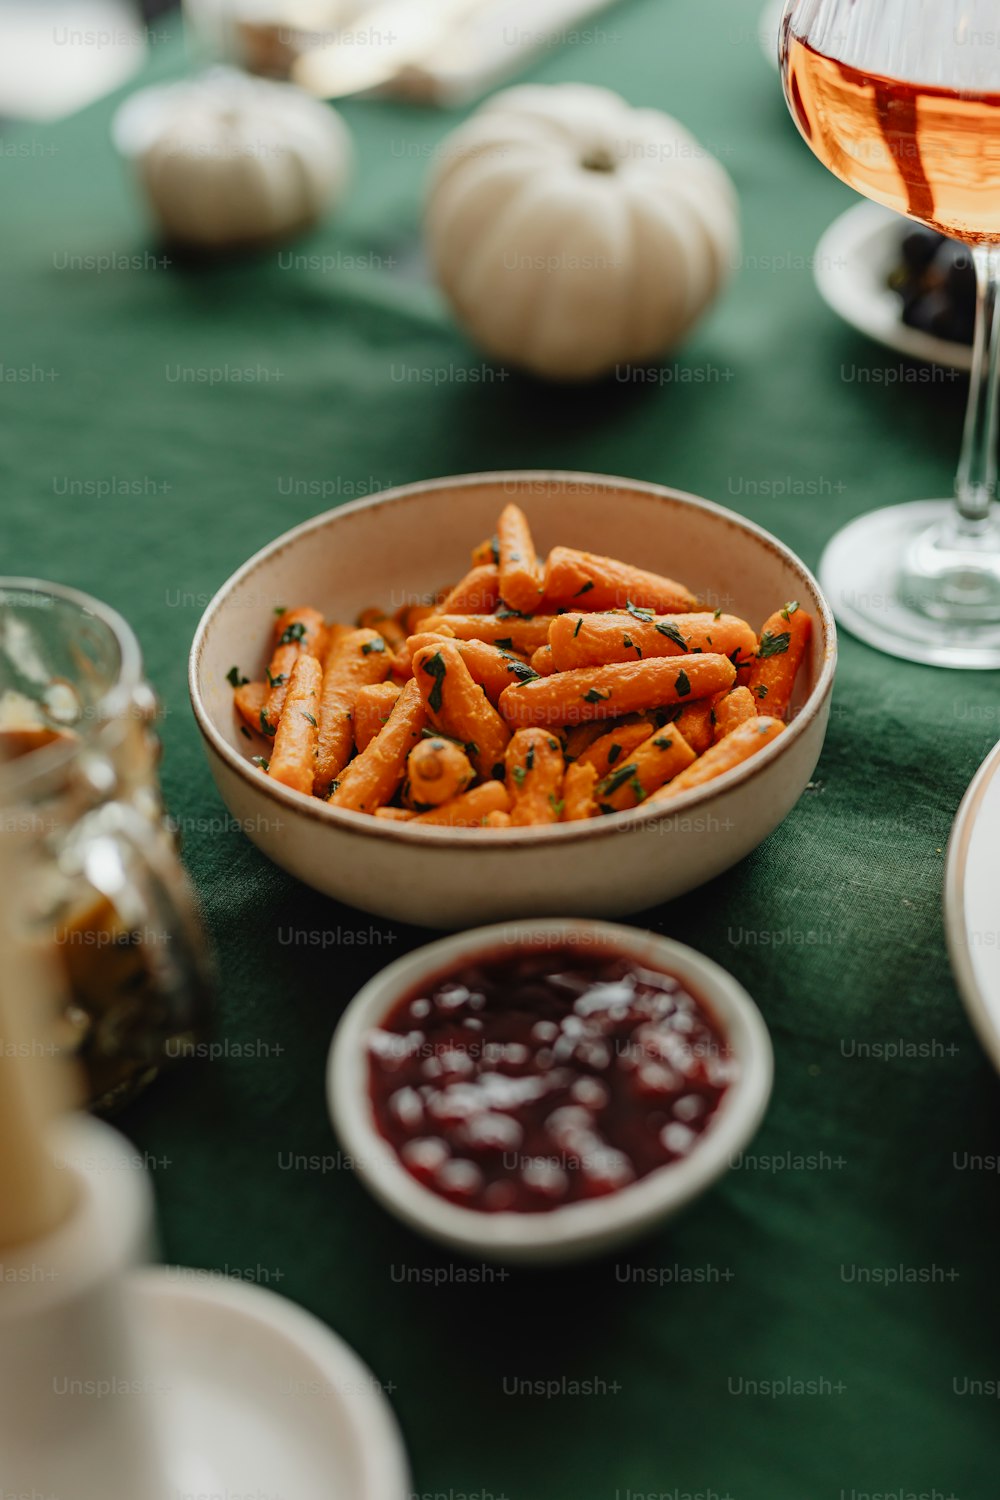 a bowl of carrots next to a glass of wine